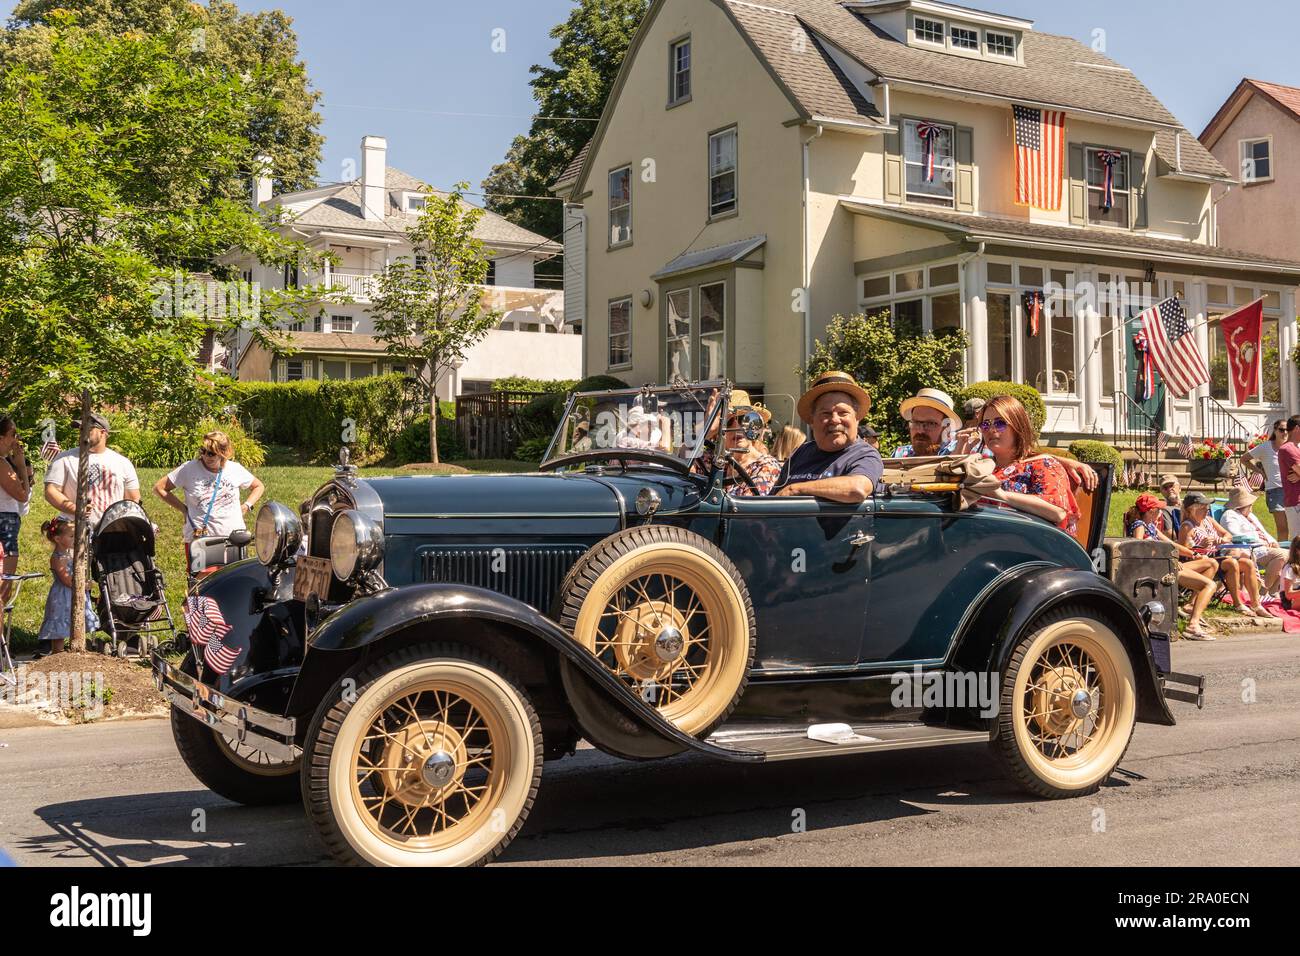 Wyomissing, Pennsylvania – July 4, 2022: Old Ford Model A Car in Small Town Fourth of July Parade Stock Photo